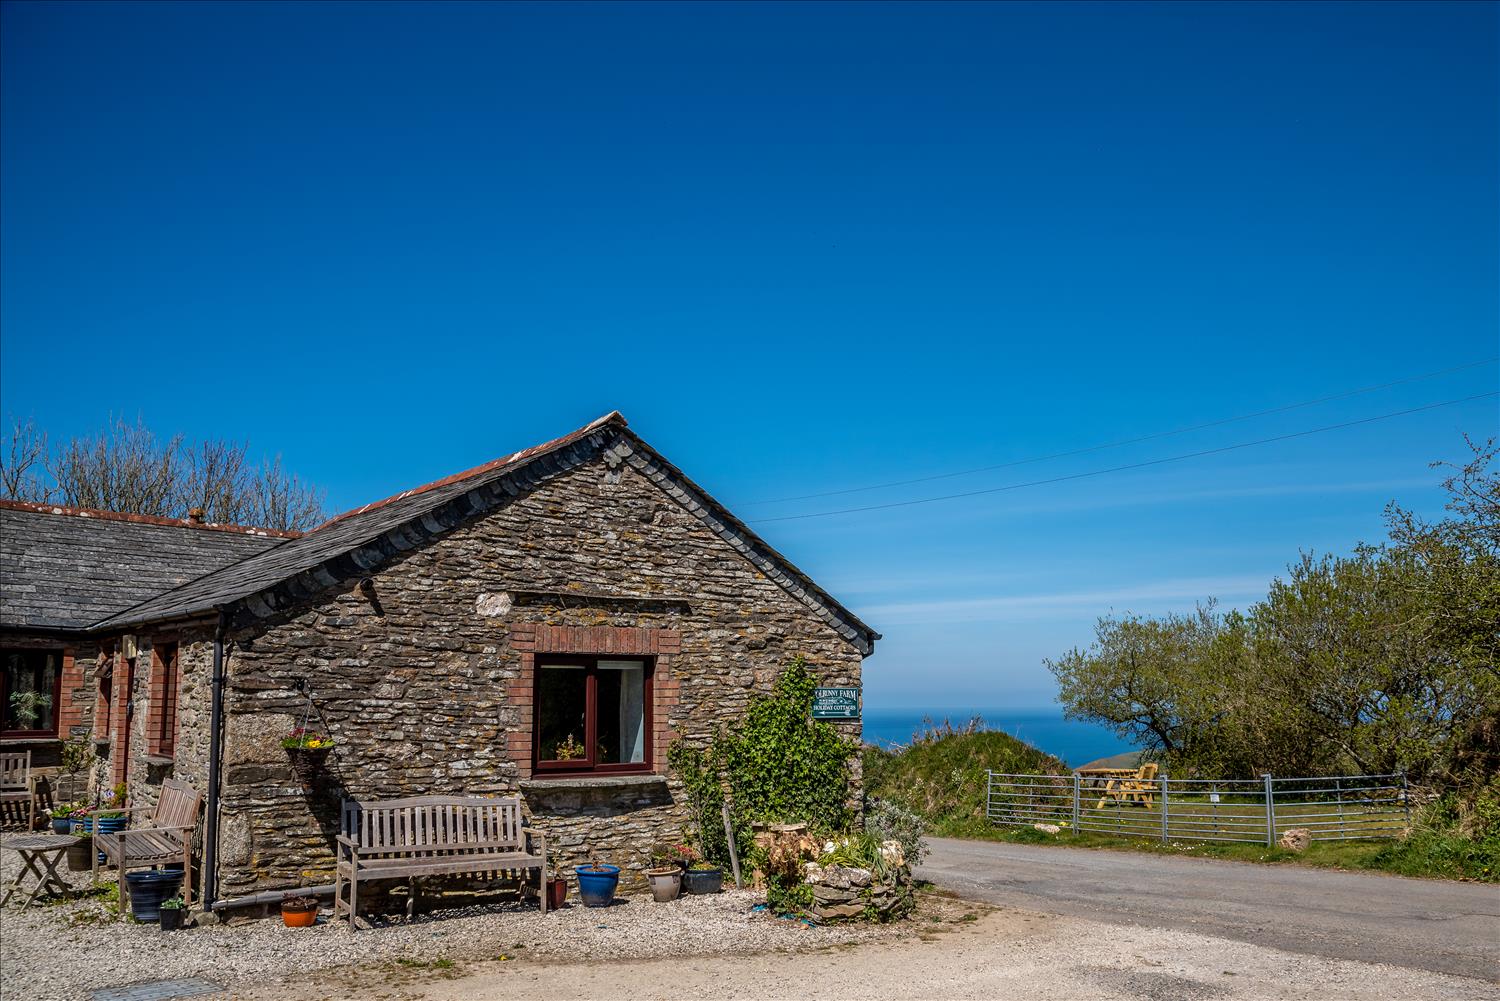 Seaberry cottage at Polrunny farm holiday cottages Cornwall - a lovely sea view